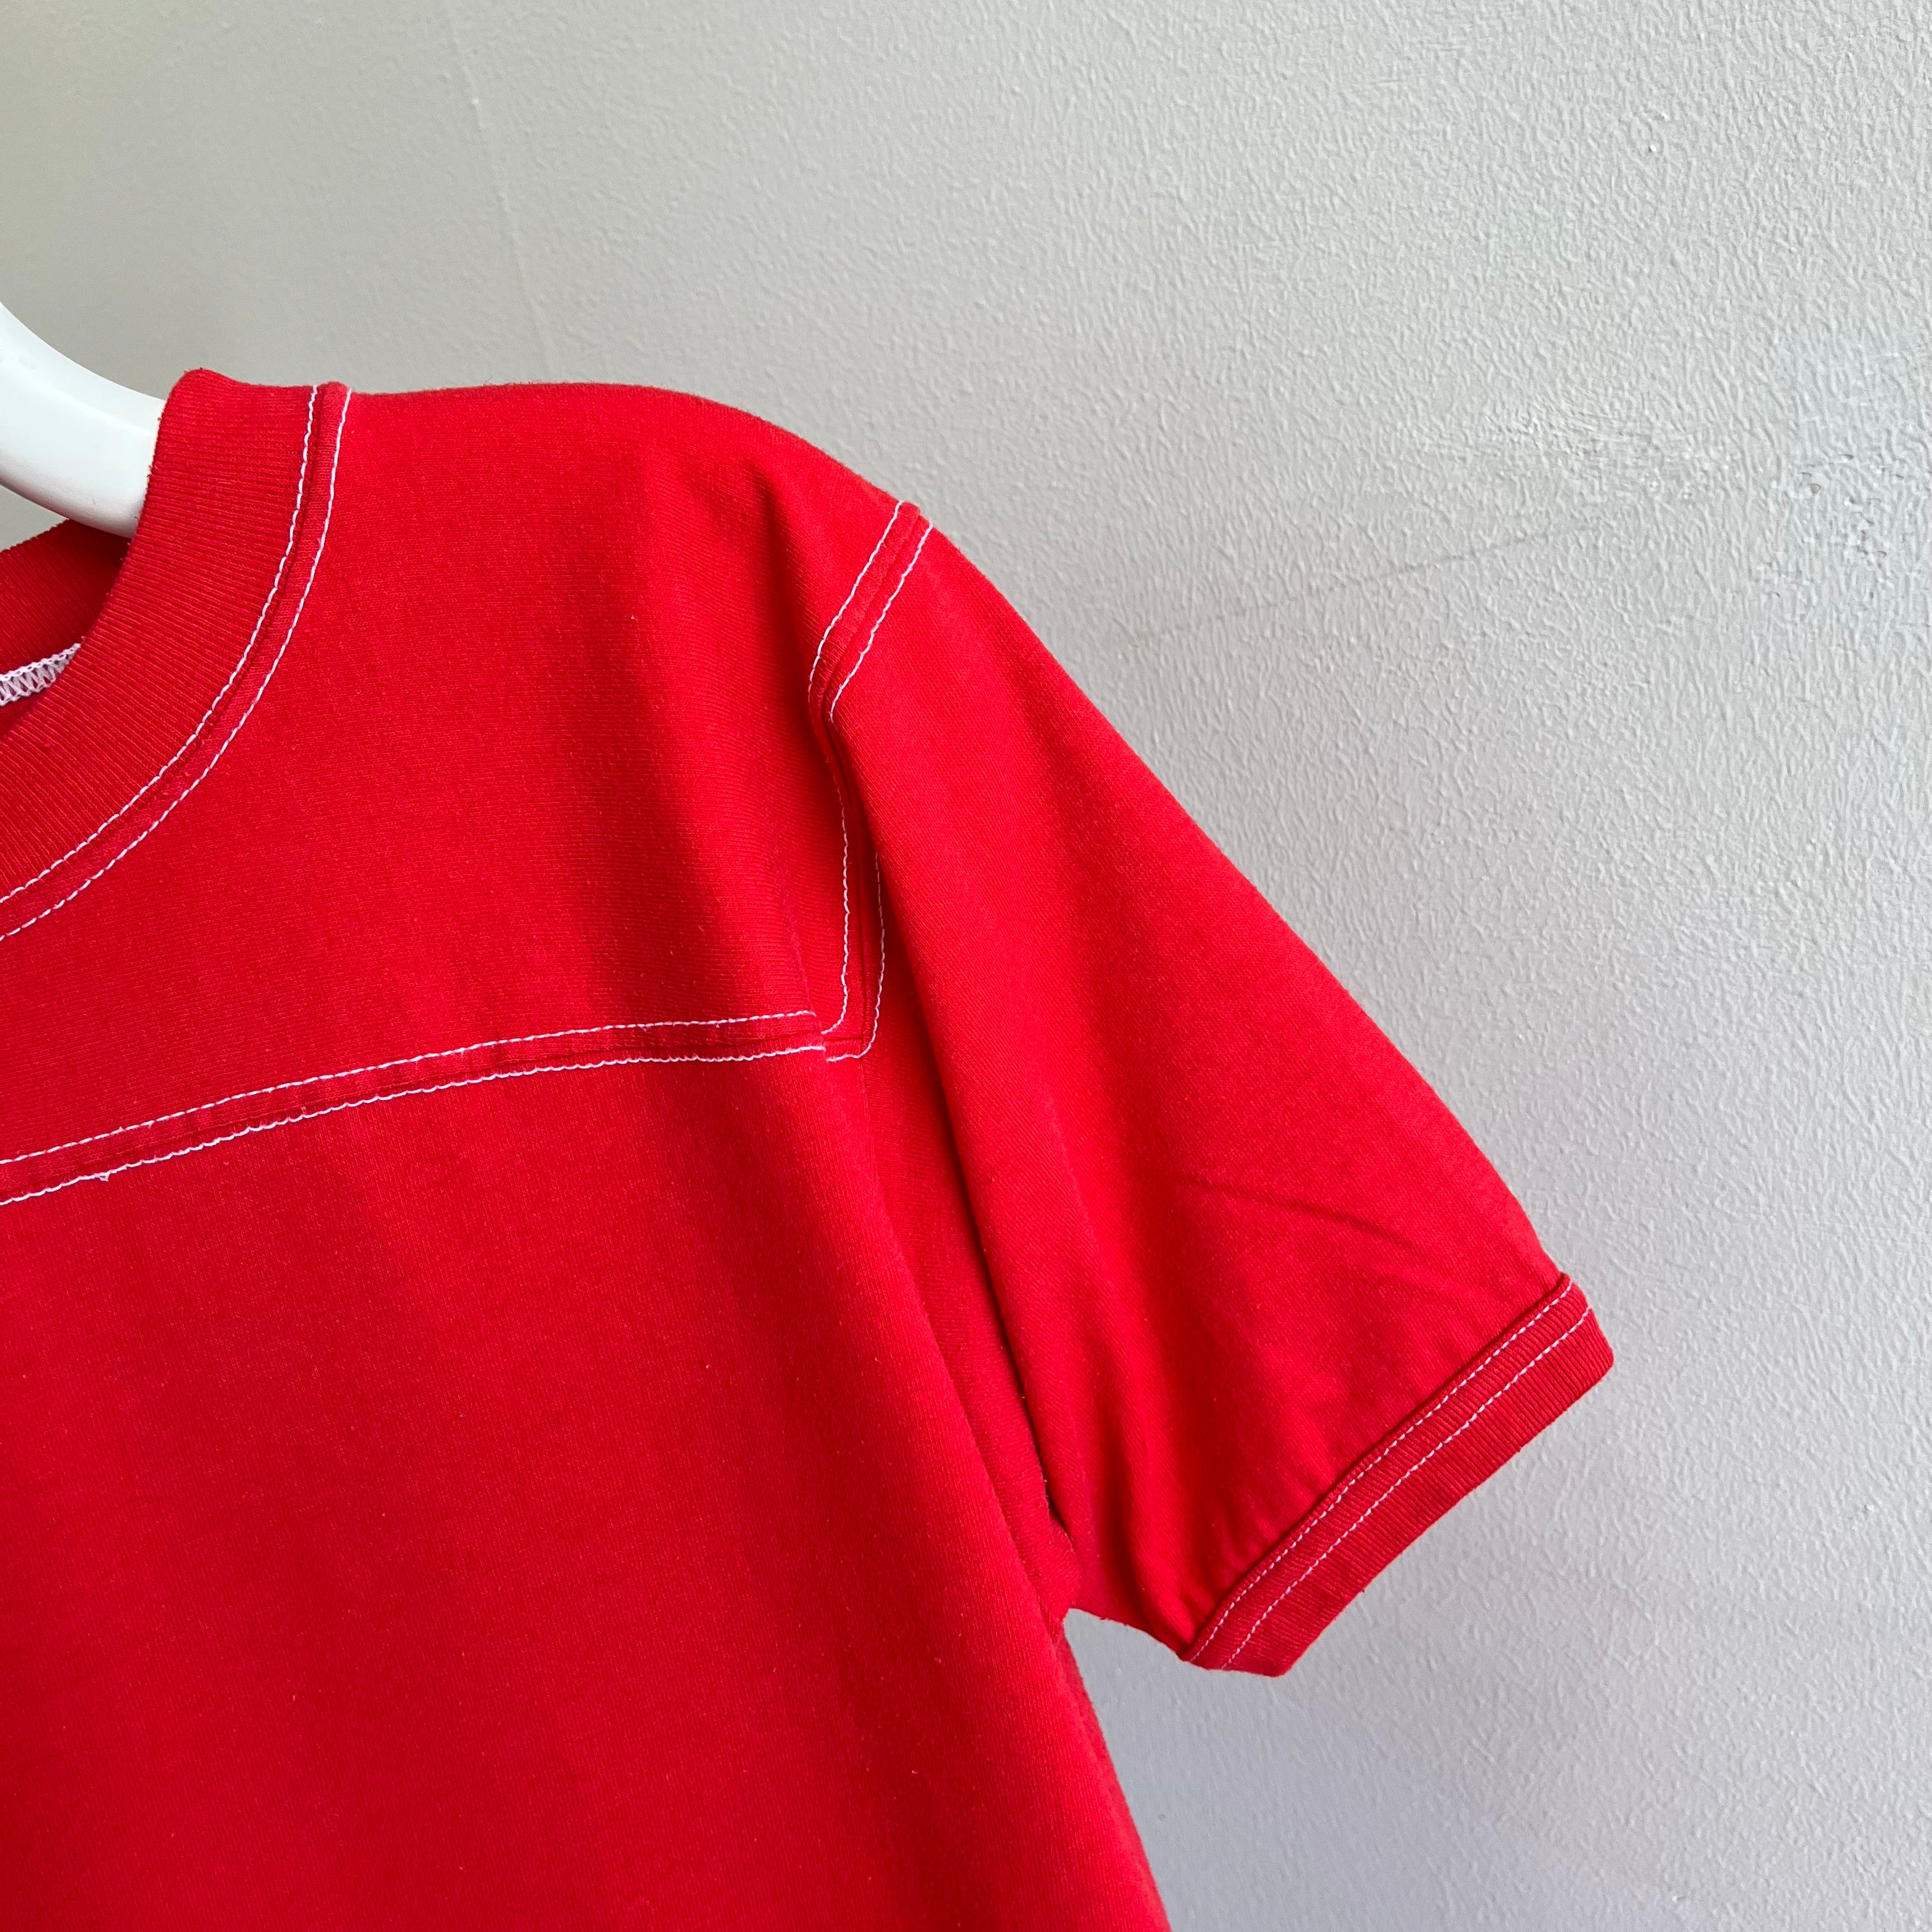 1970/80s Blank Red Football T-Shirt with Contrast White Stitching